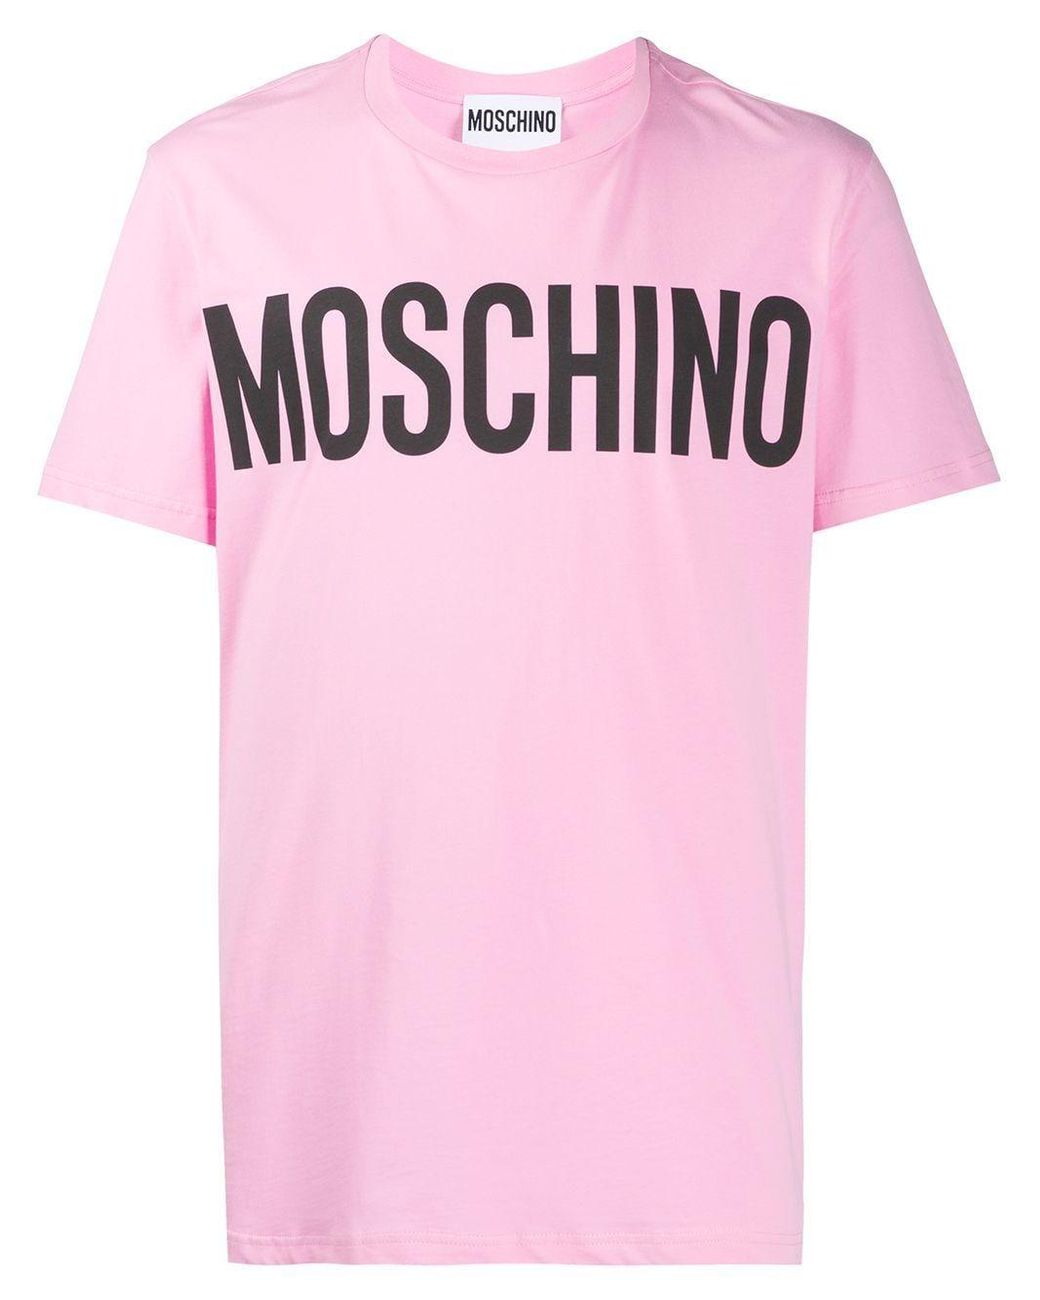 Moschino Cotton T-shirt in Pink for Men - Lyst